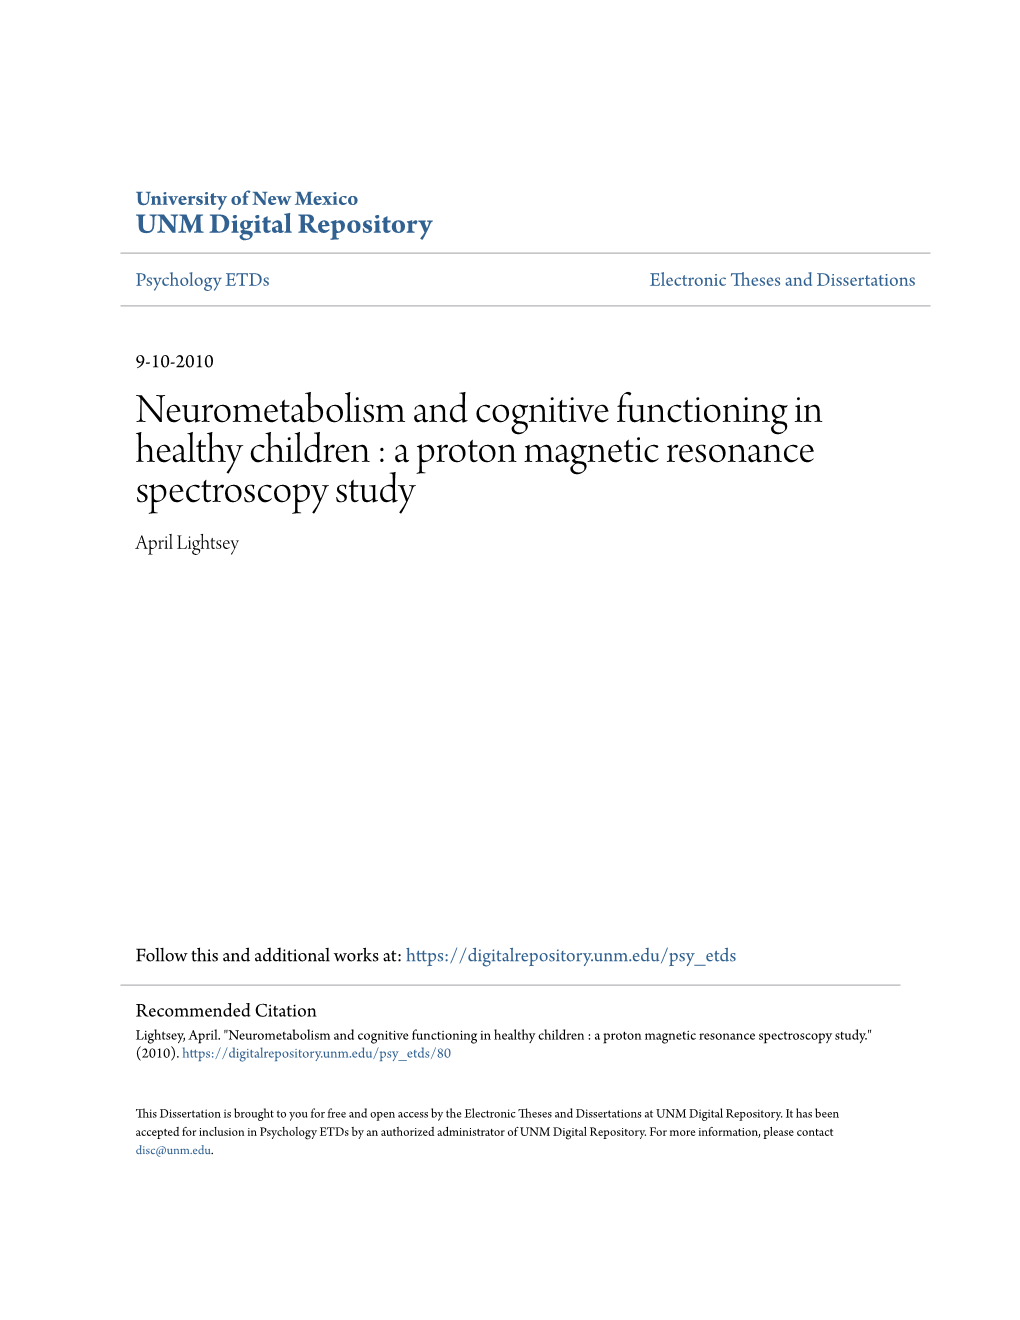 Neurometabolism and Cognitive Functioning in Healthy Children : a Proton Magnetic Resonance Spectroscopy Study April Lightsey